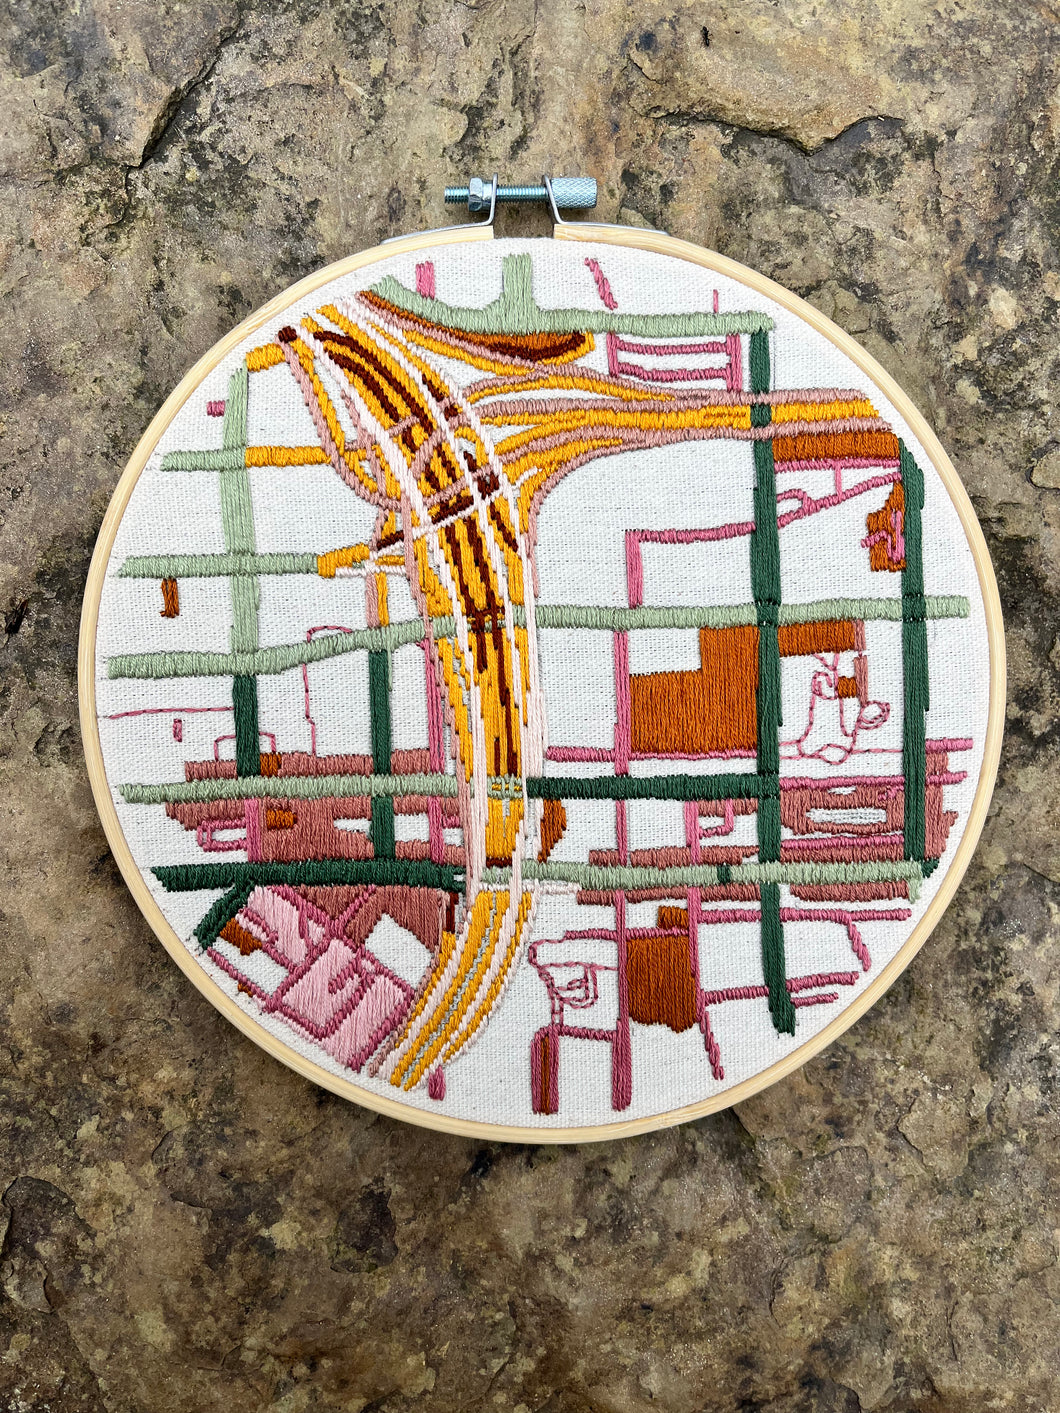 8 inch Downtown Atlanta Roads Hand-Embroidered Map 70's Colors